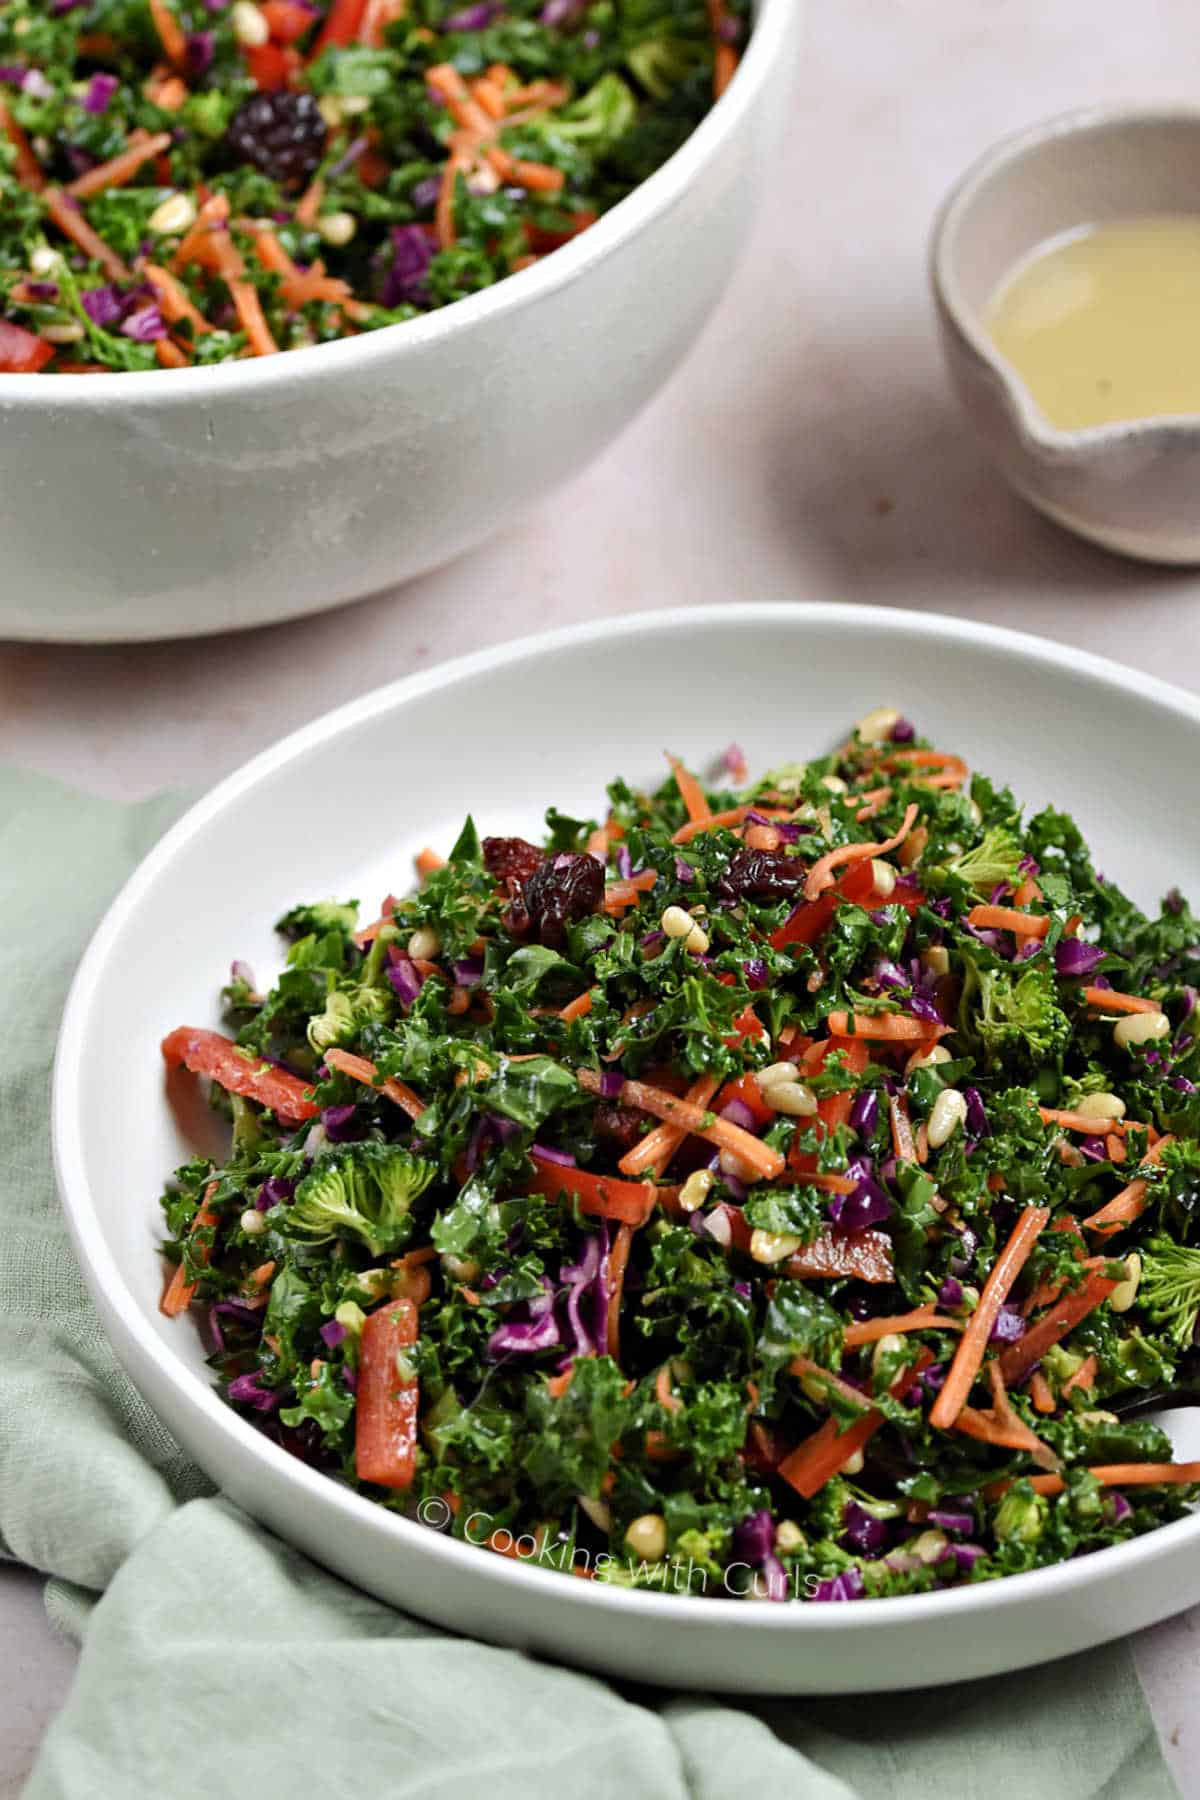 Chopped kale salad in a bowl with a container of dressing and large bowl of salad in the background.